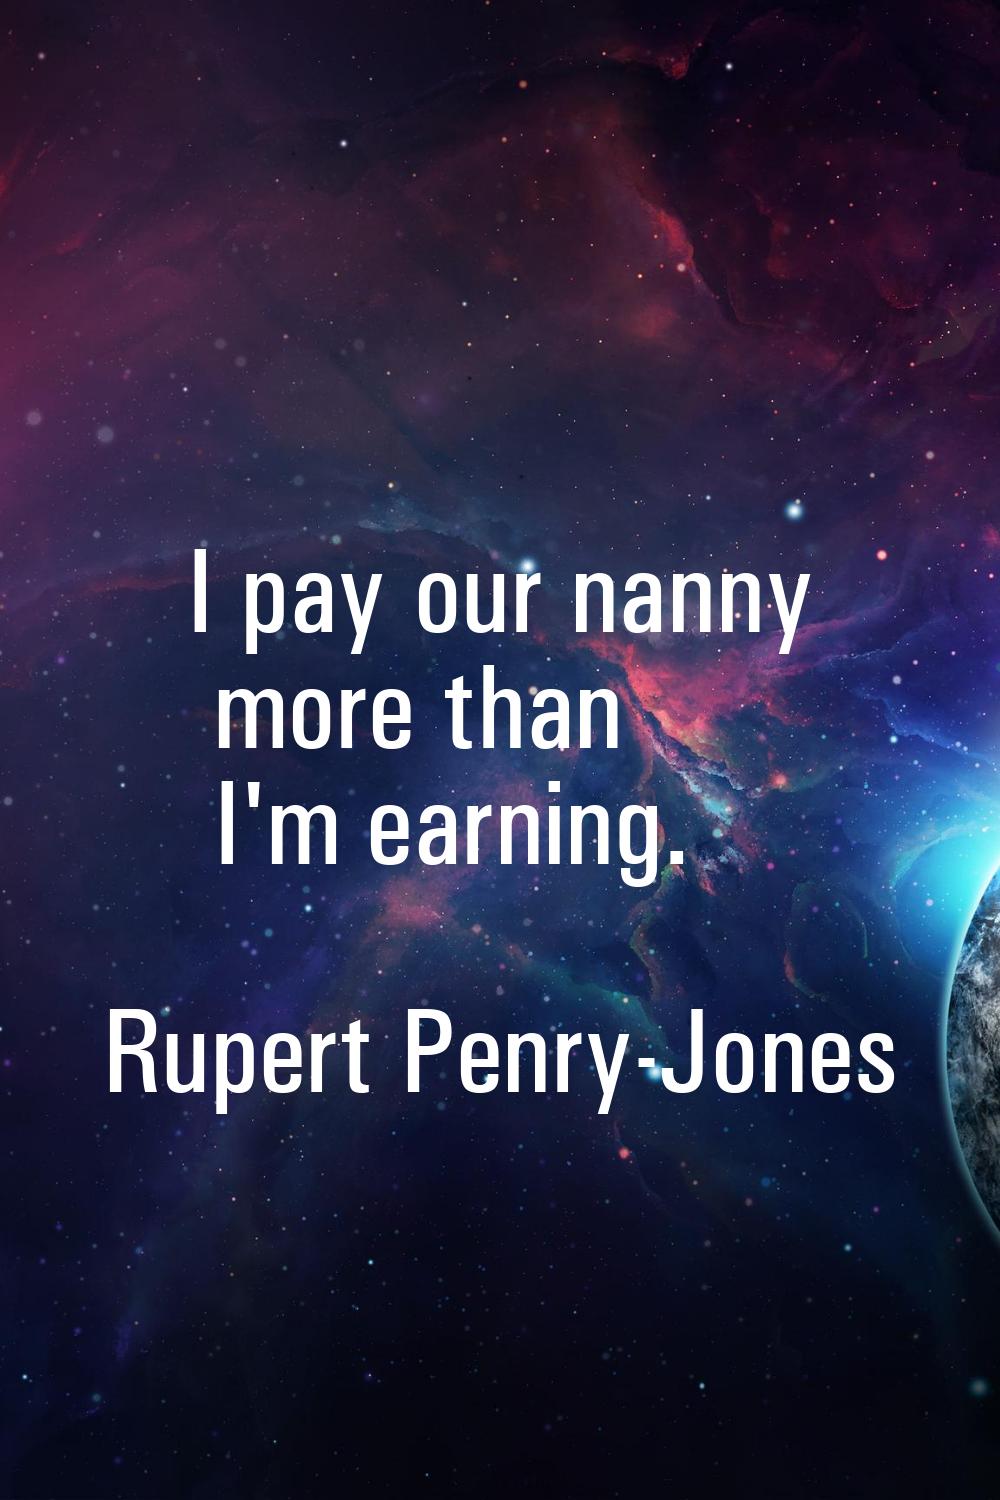 I pay our nanny more than I'm earning.